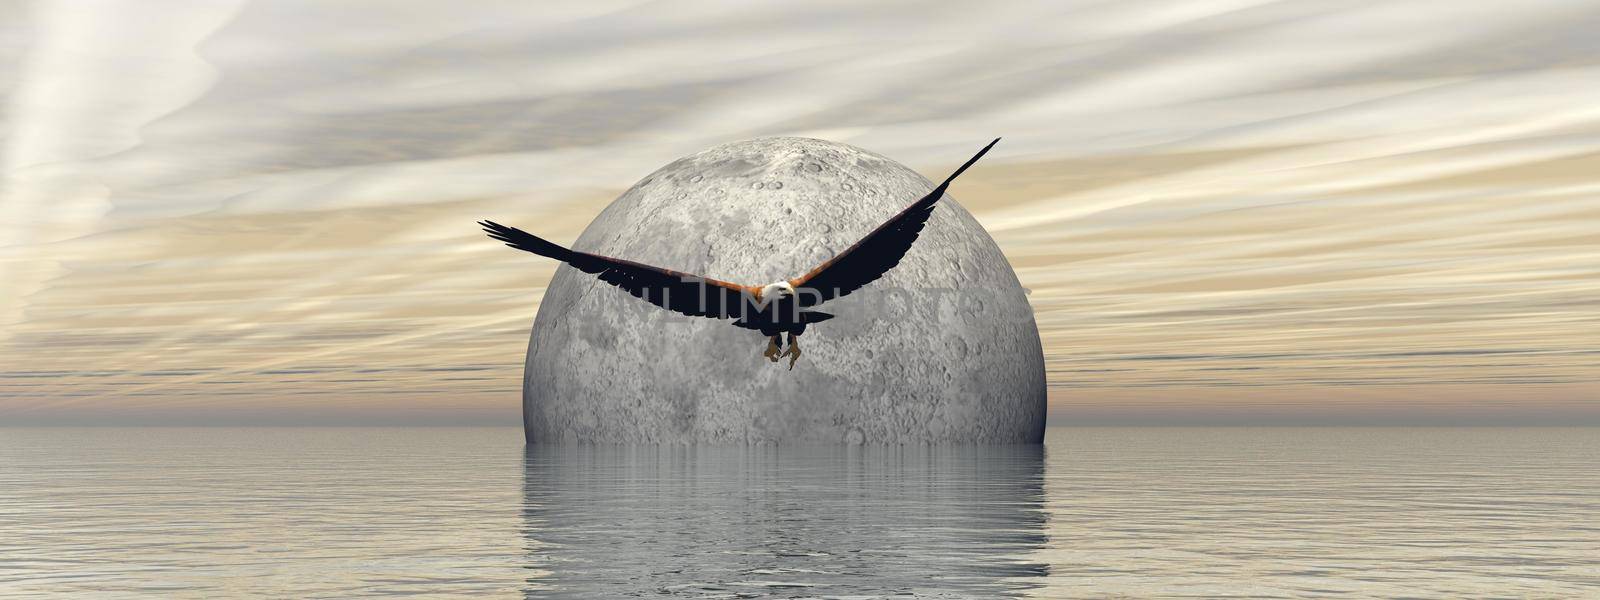 flying an eagle with a beautiful full moon landscape - 3d rendering by mariephotos